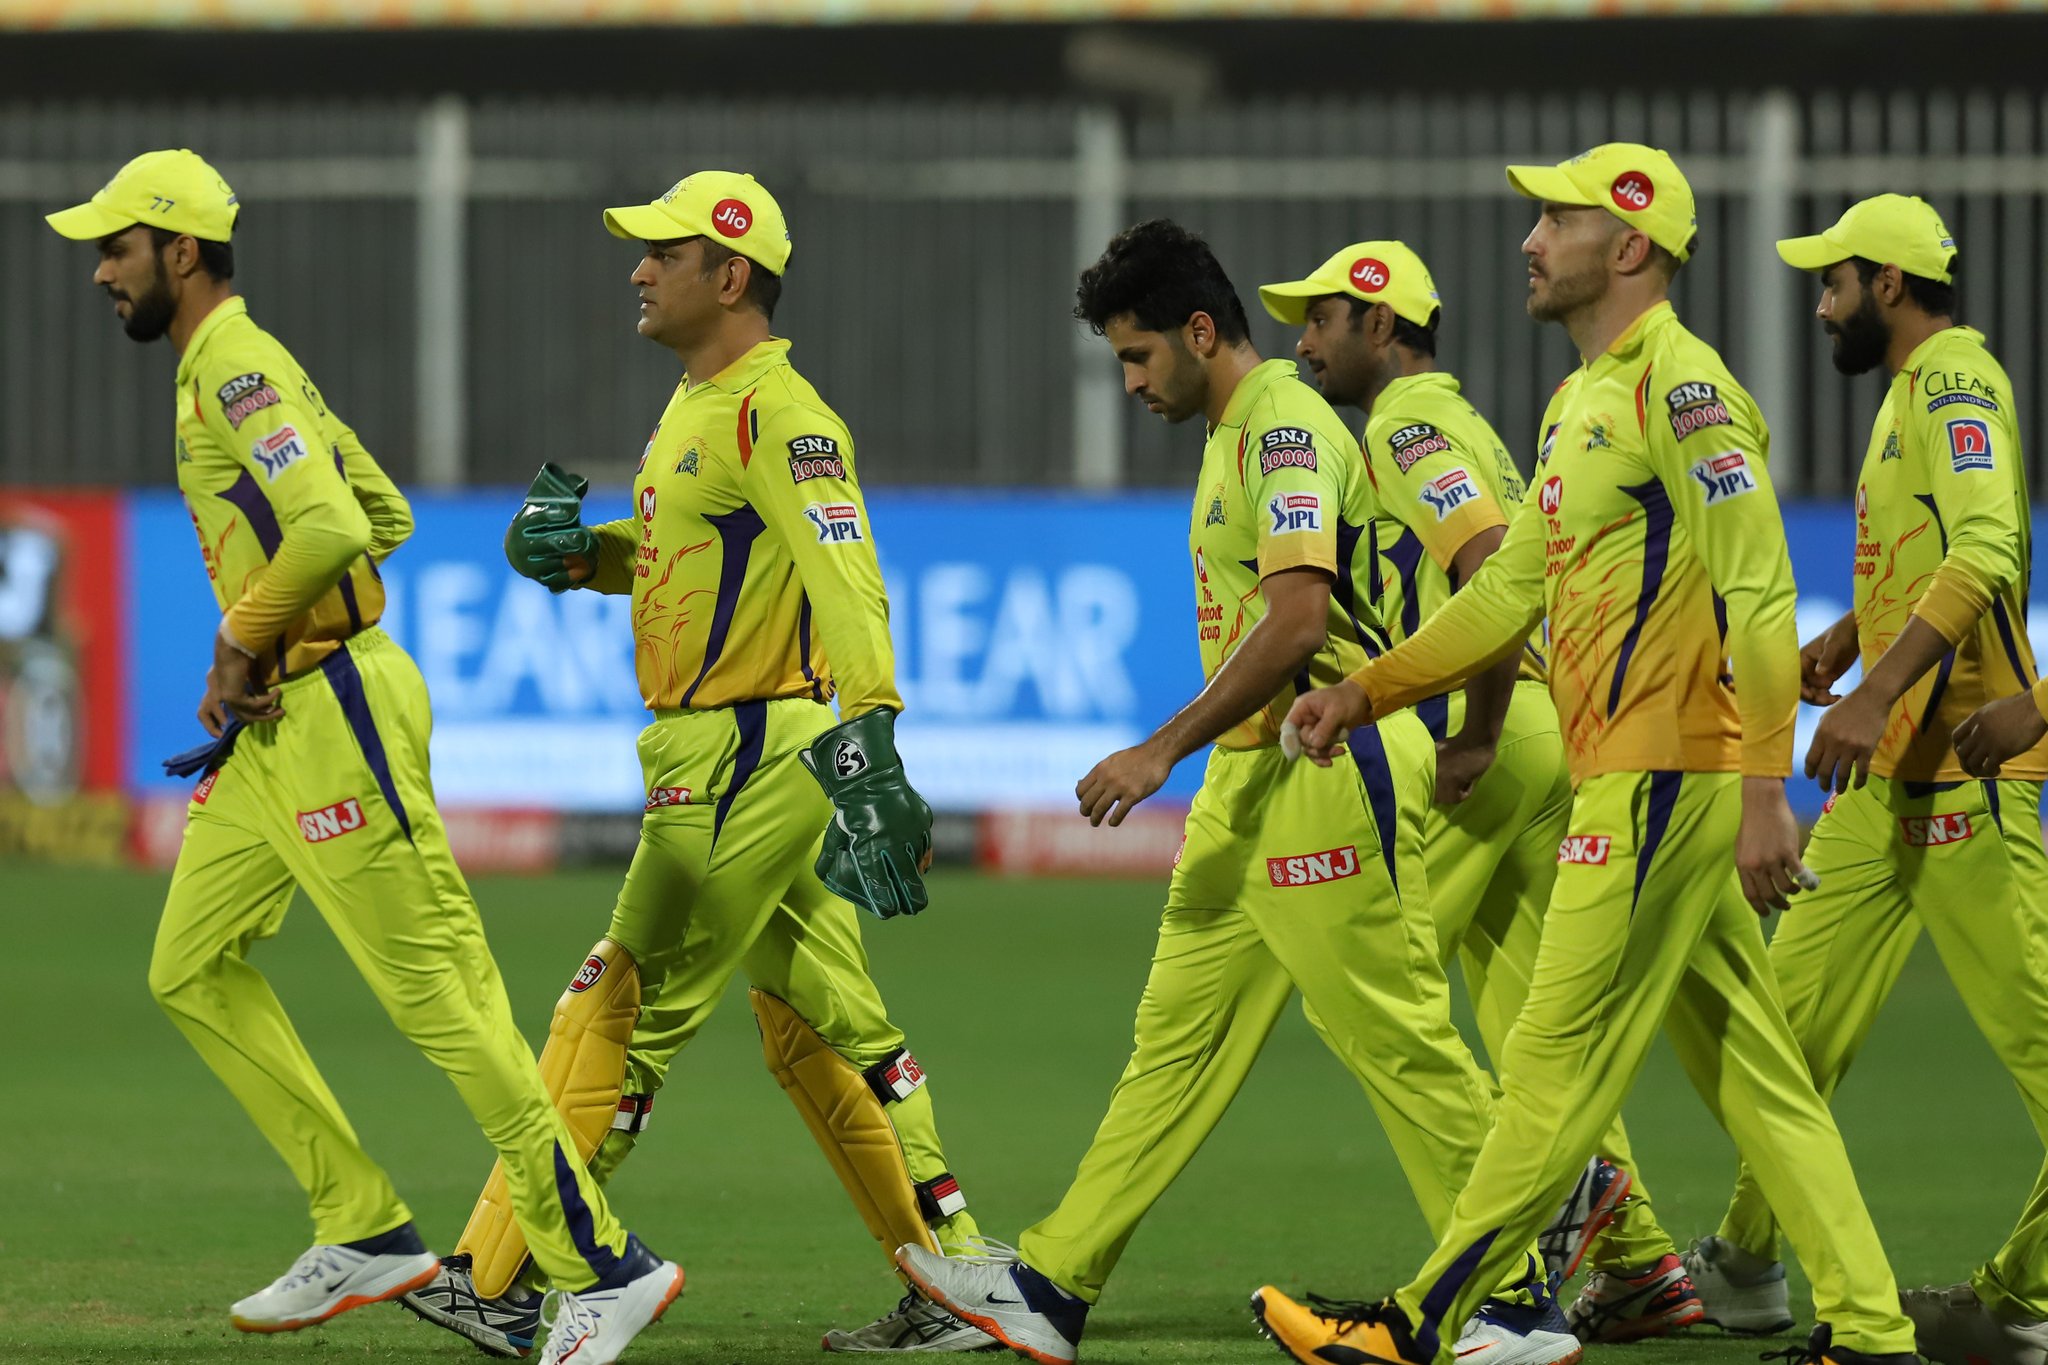 CSK has often referred to as 'Dad's Army' | BCCI/IPL